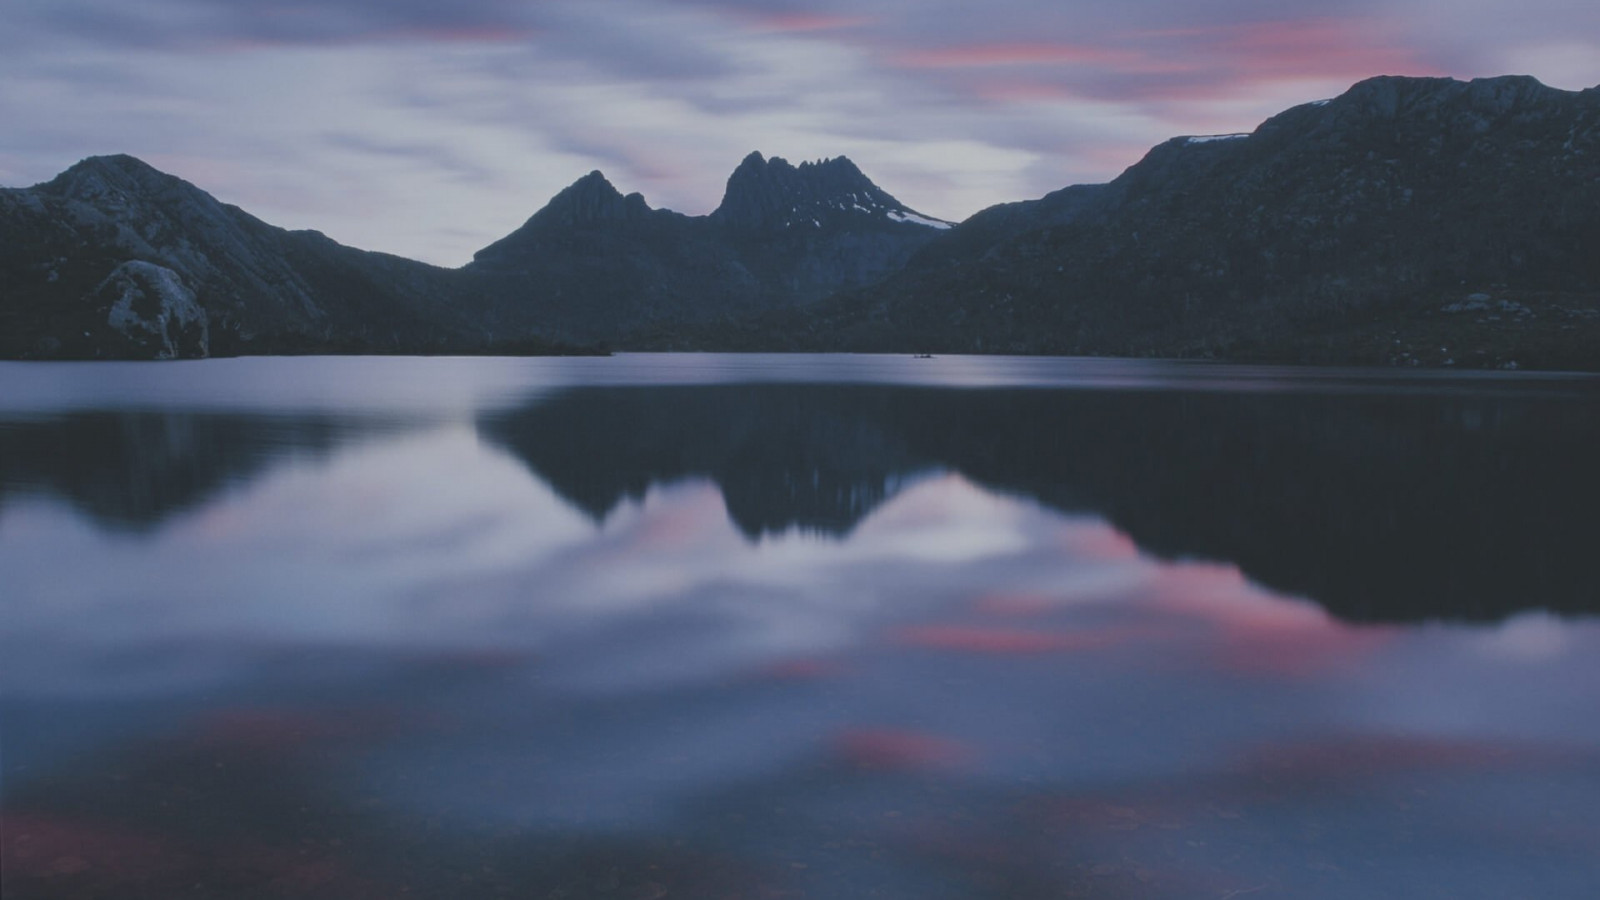 Cradle Mountain Wallpapers